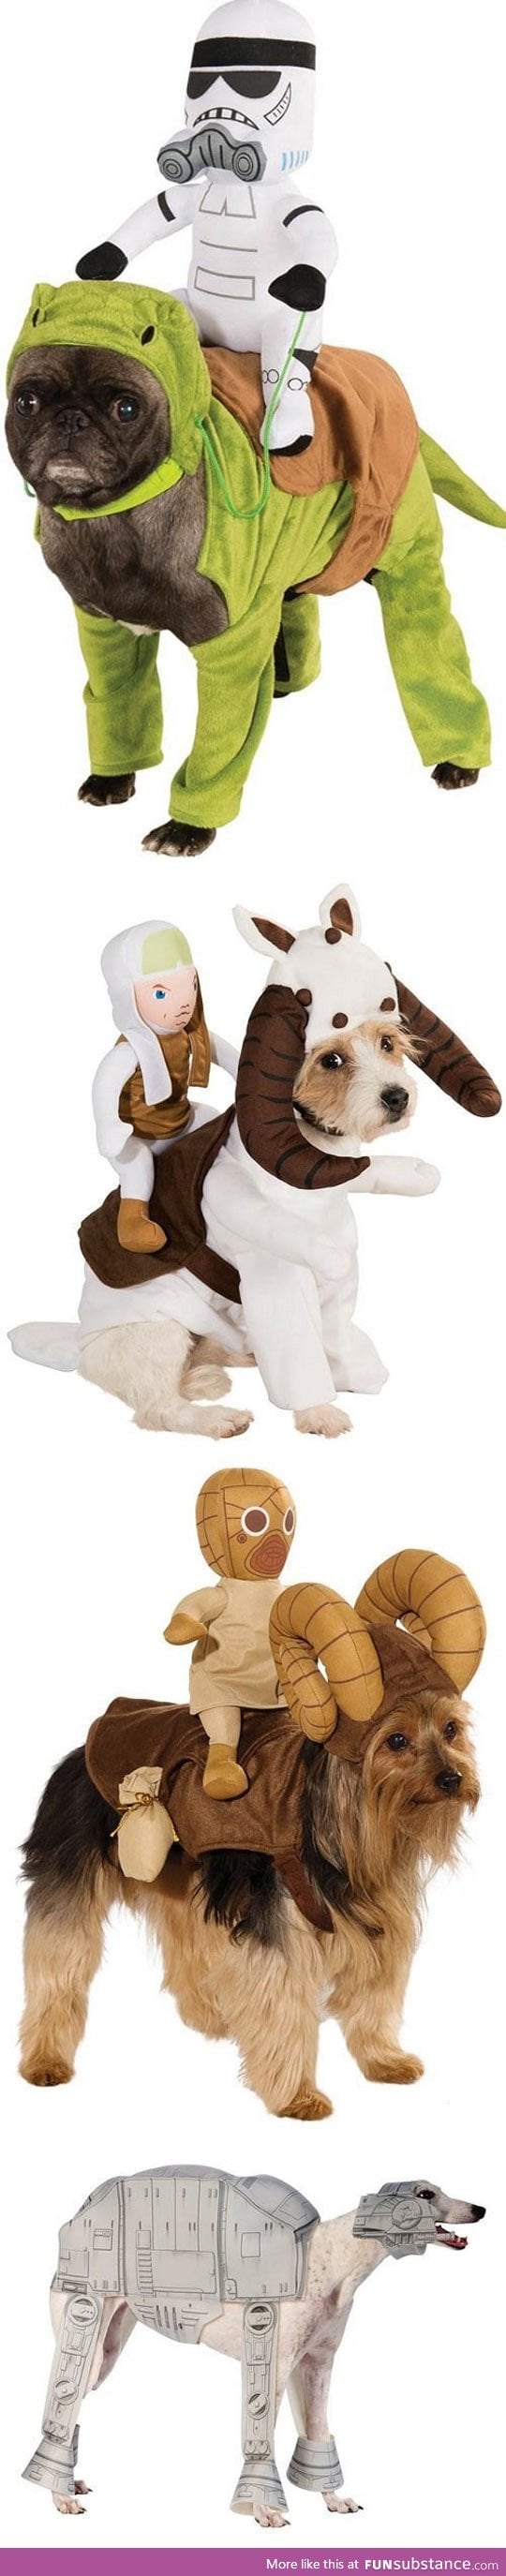 Brilliant star wars costumes for dogs